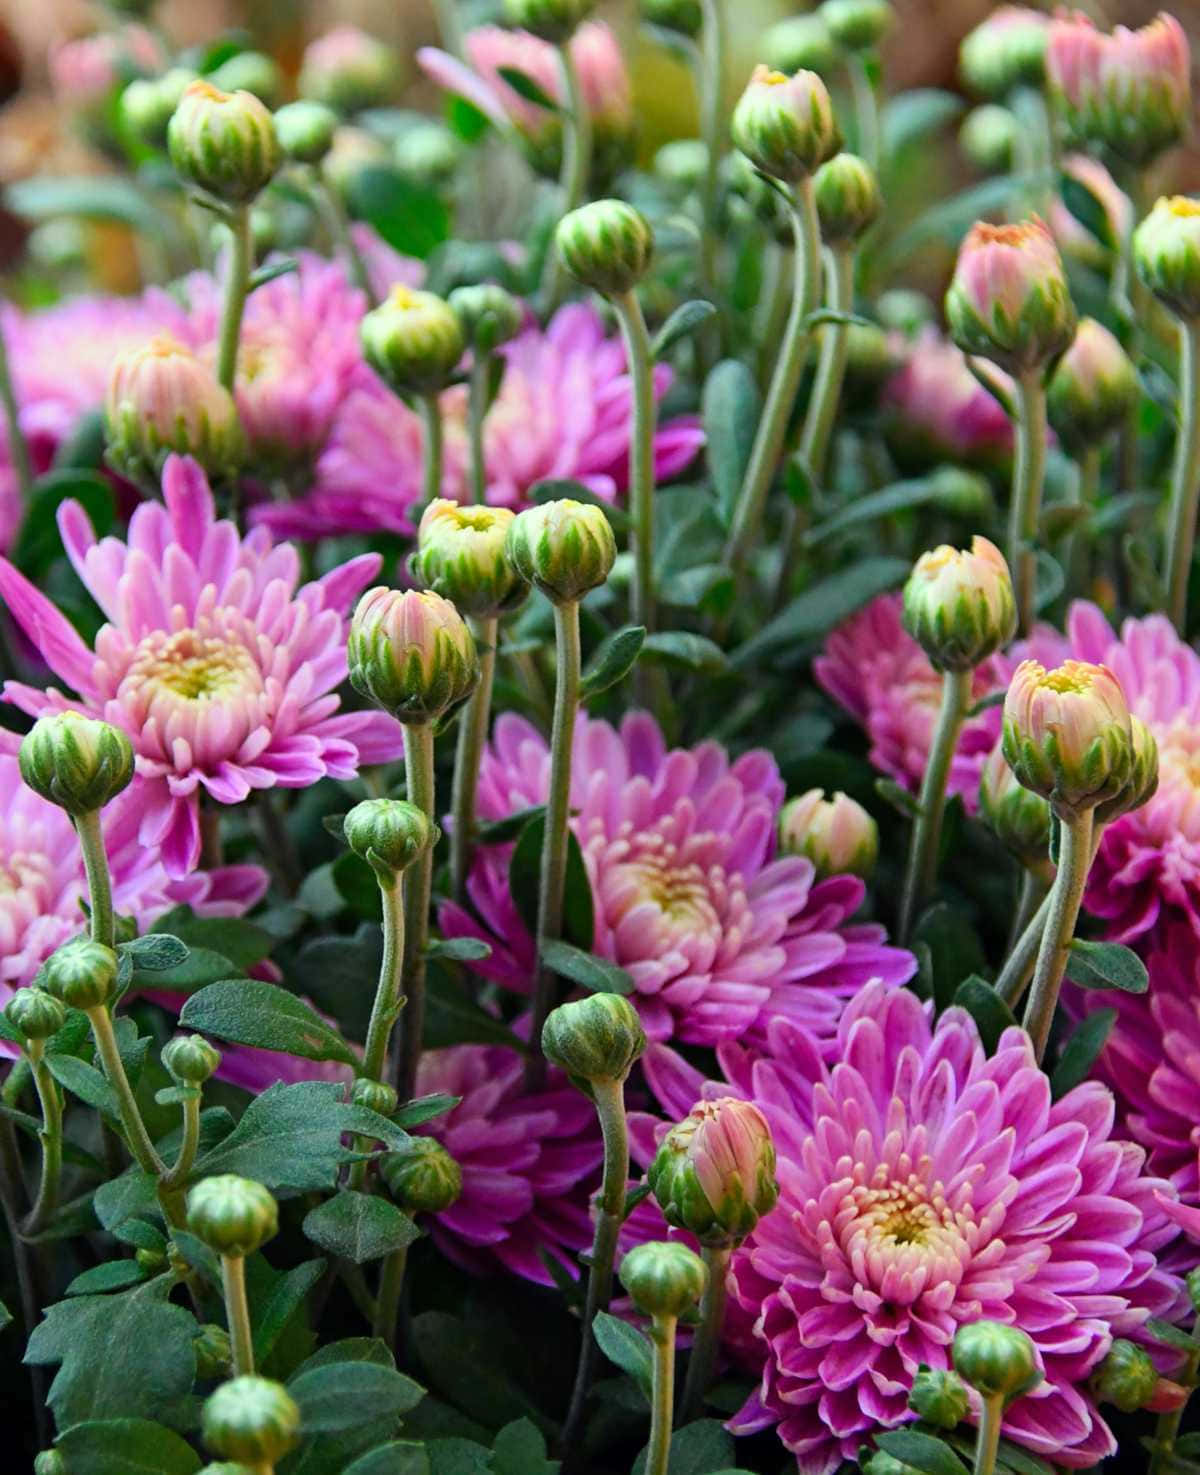 A beautiful, vibrant chrysanthemum flower for a special occasion